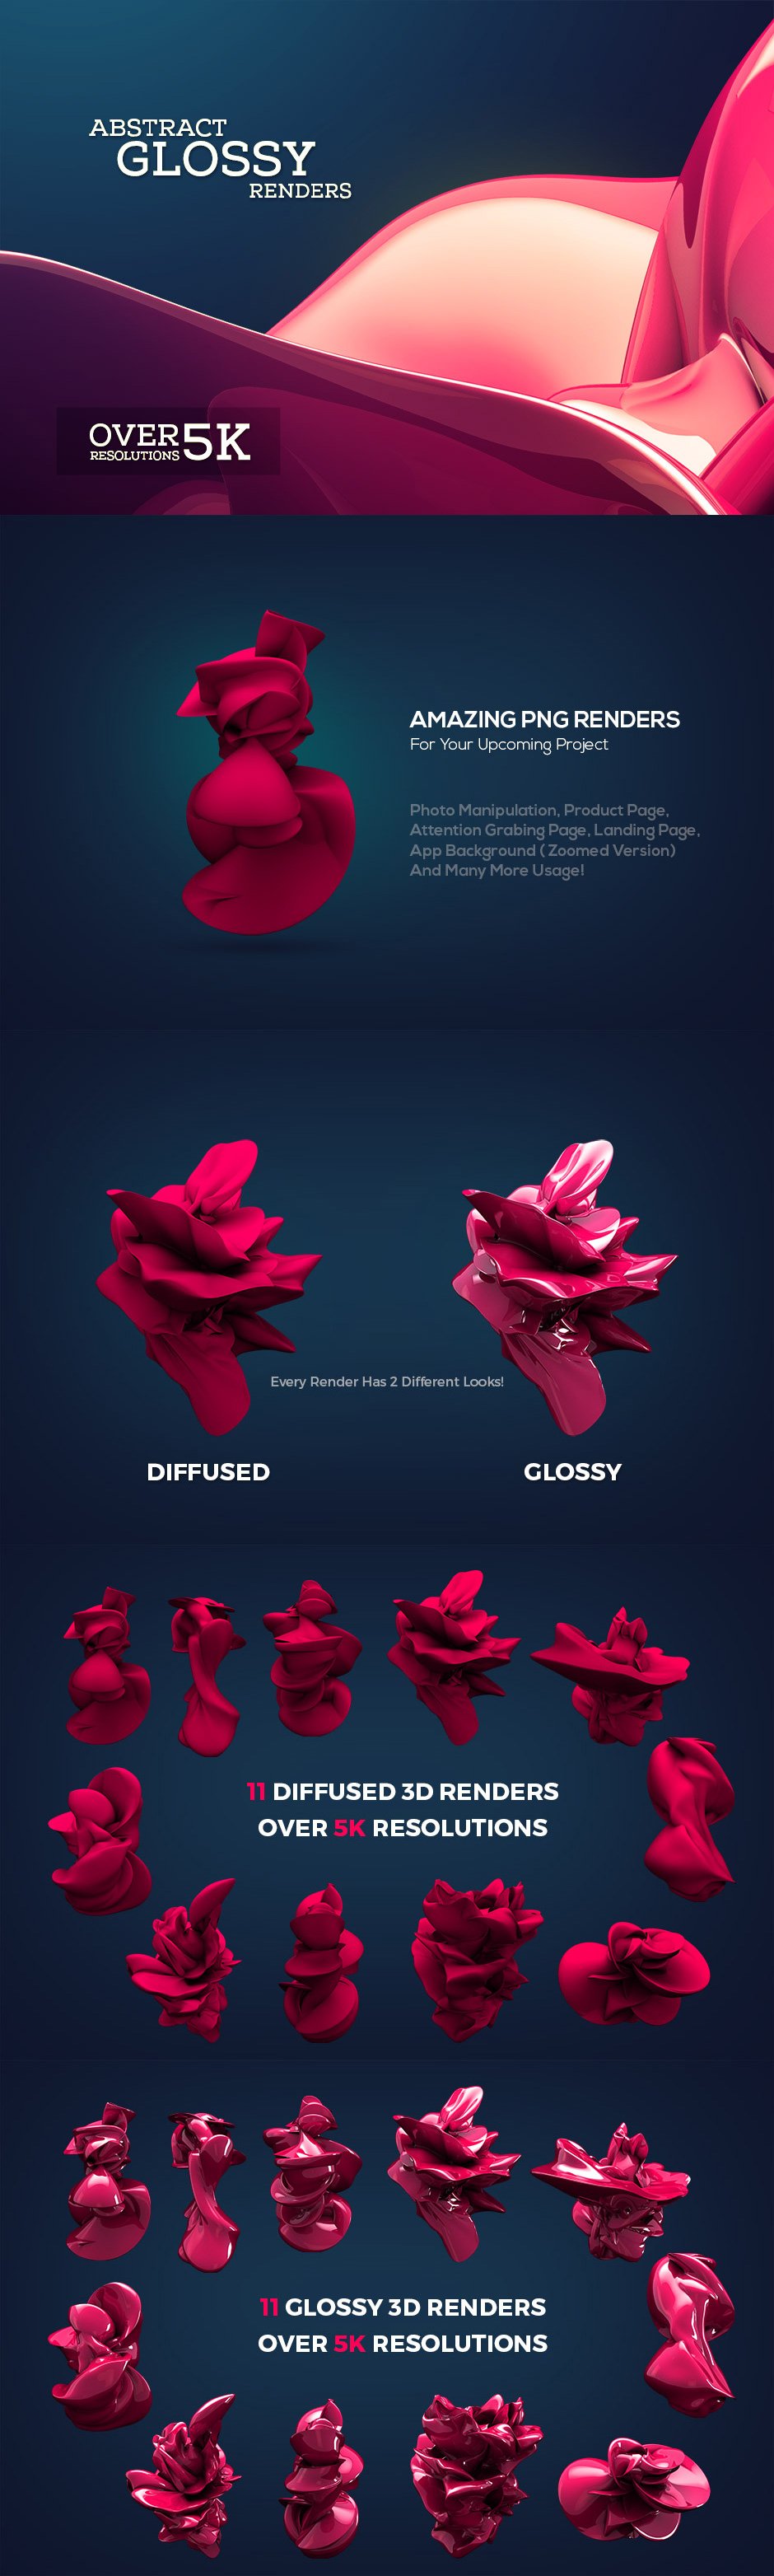 Abstract Glossy 3D Renders